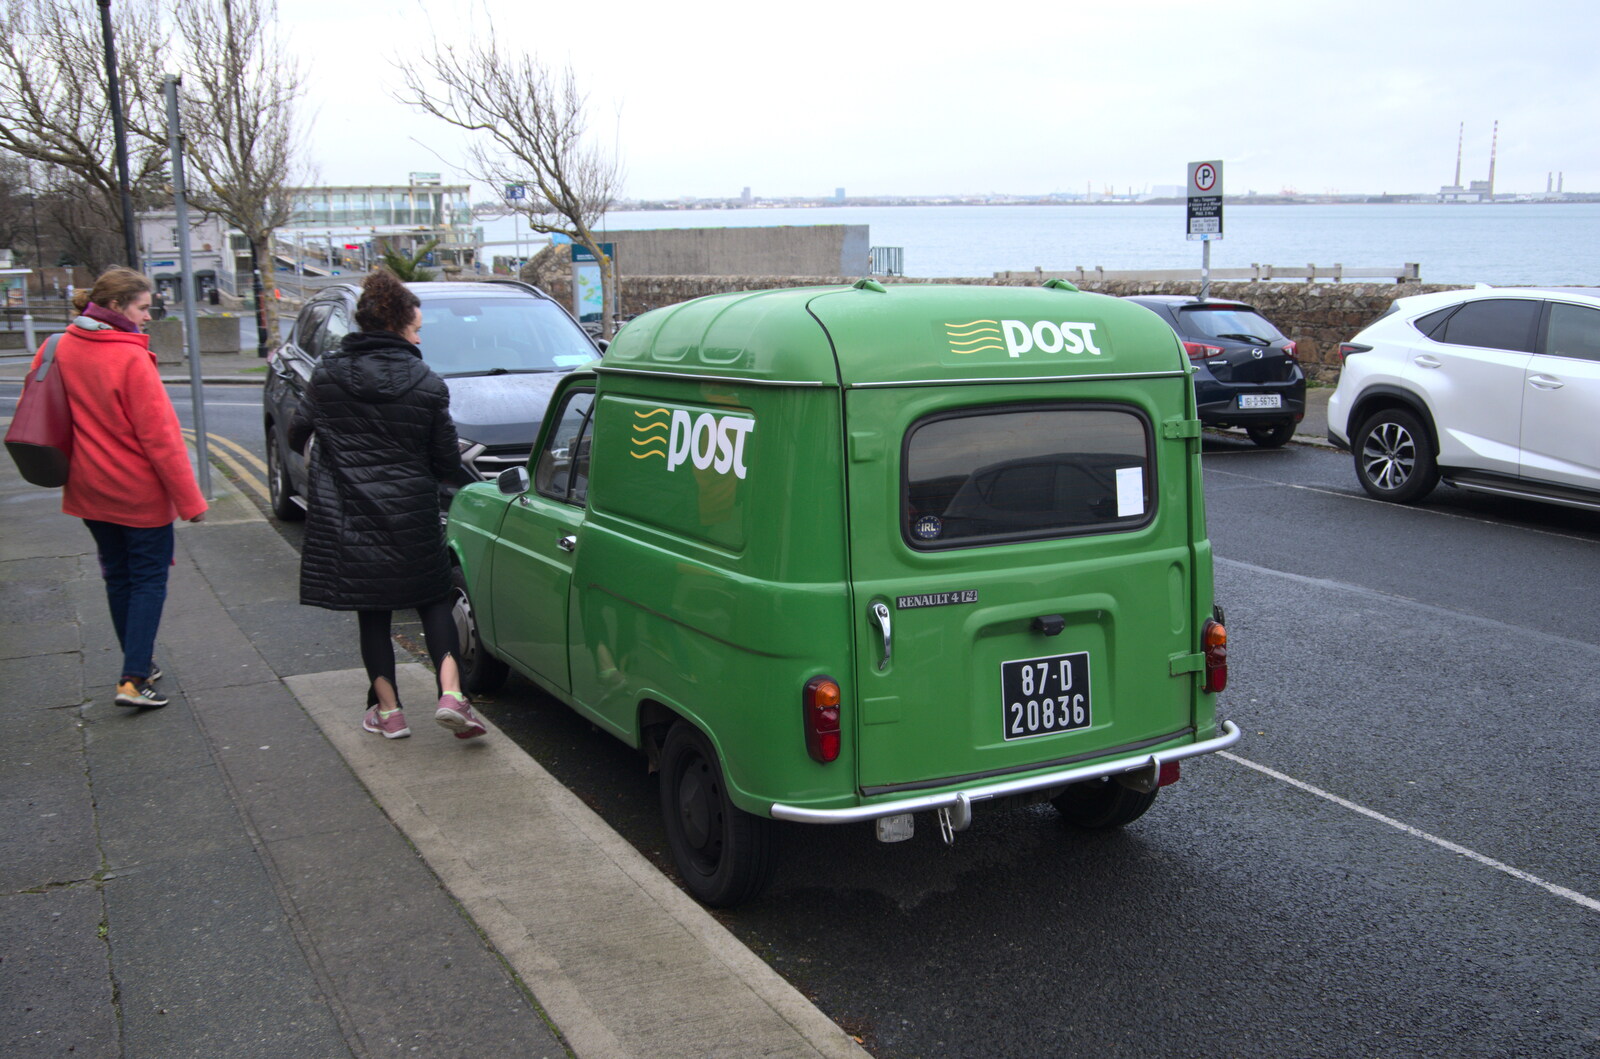 The End of the Breffni, Blackrock, Dublin - 18th February 2023: A cool 1987 Renault 4 post van on Idrone Terrace